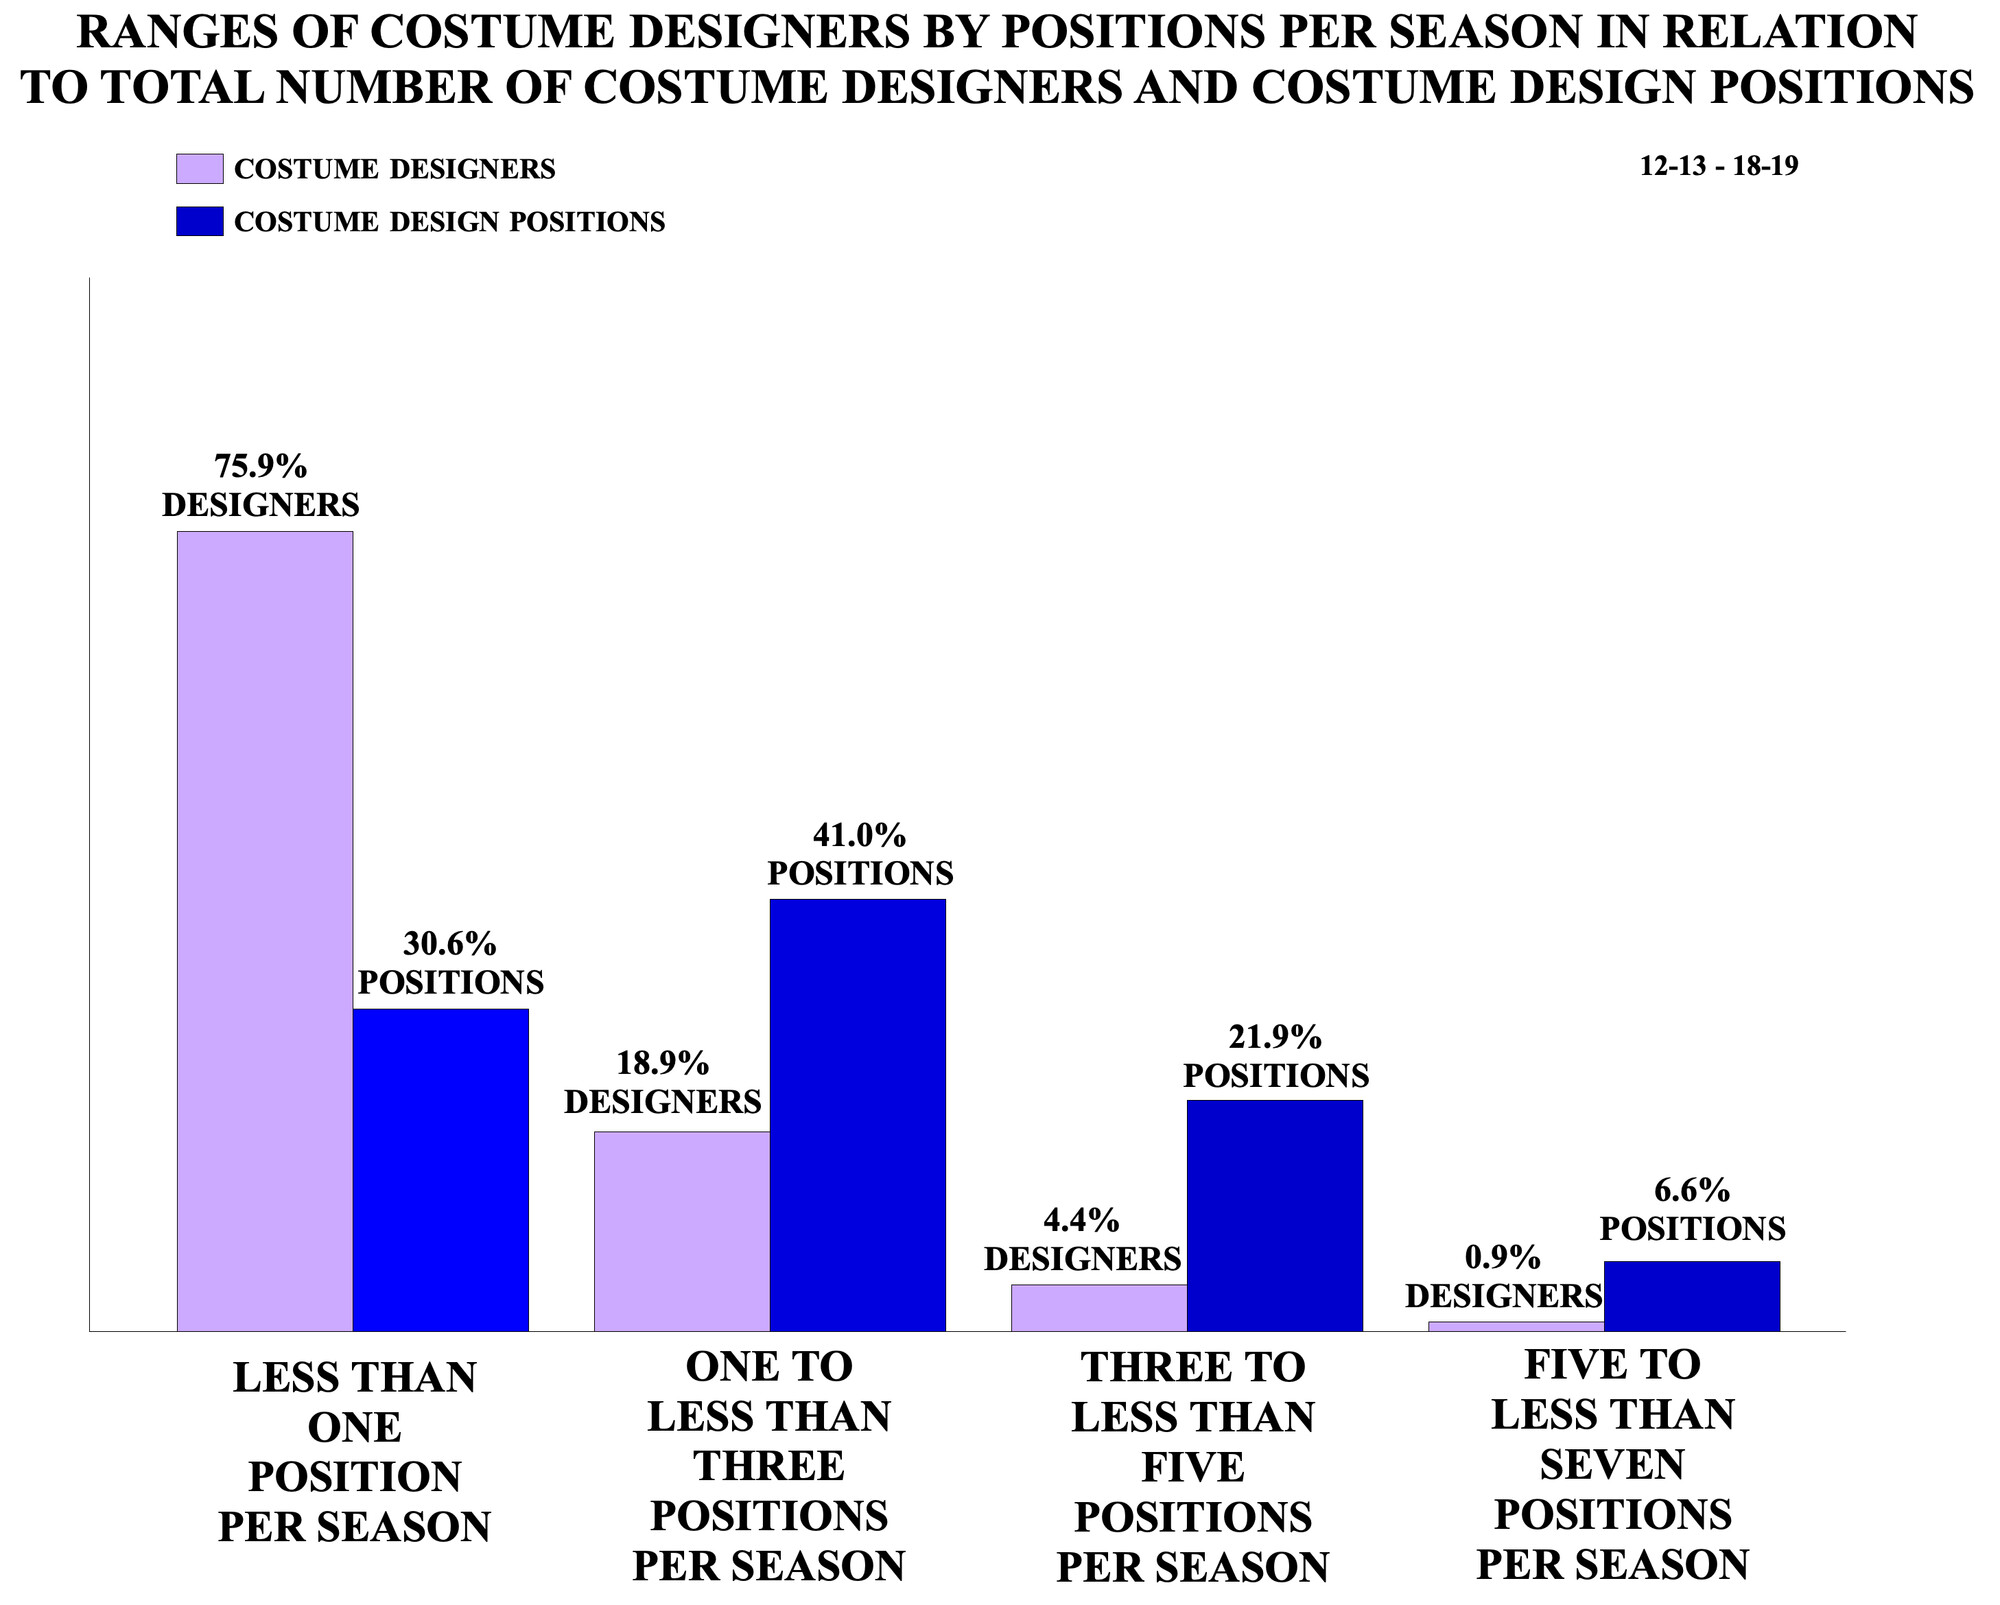 Ranges of Costume Designers by Positions Per Season in Relation to Total Number of Costume Designers and Costume Design Positions